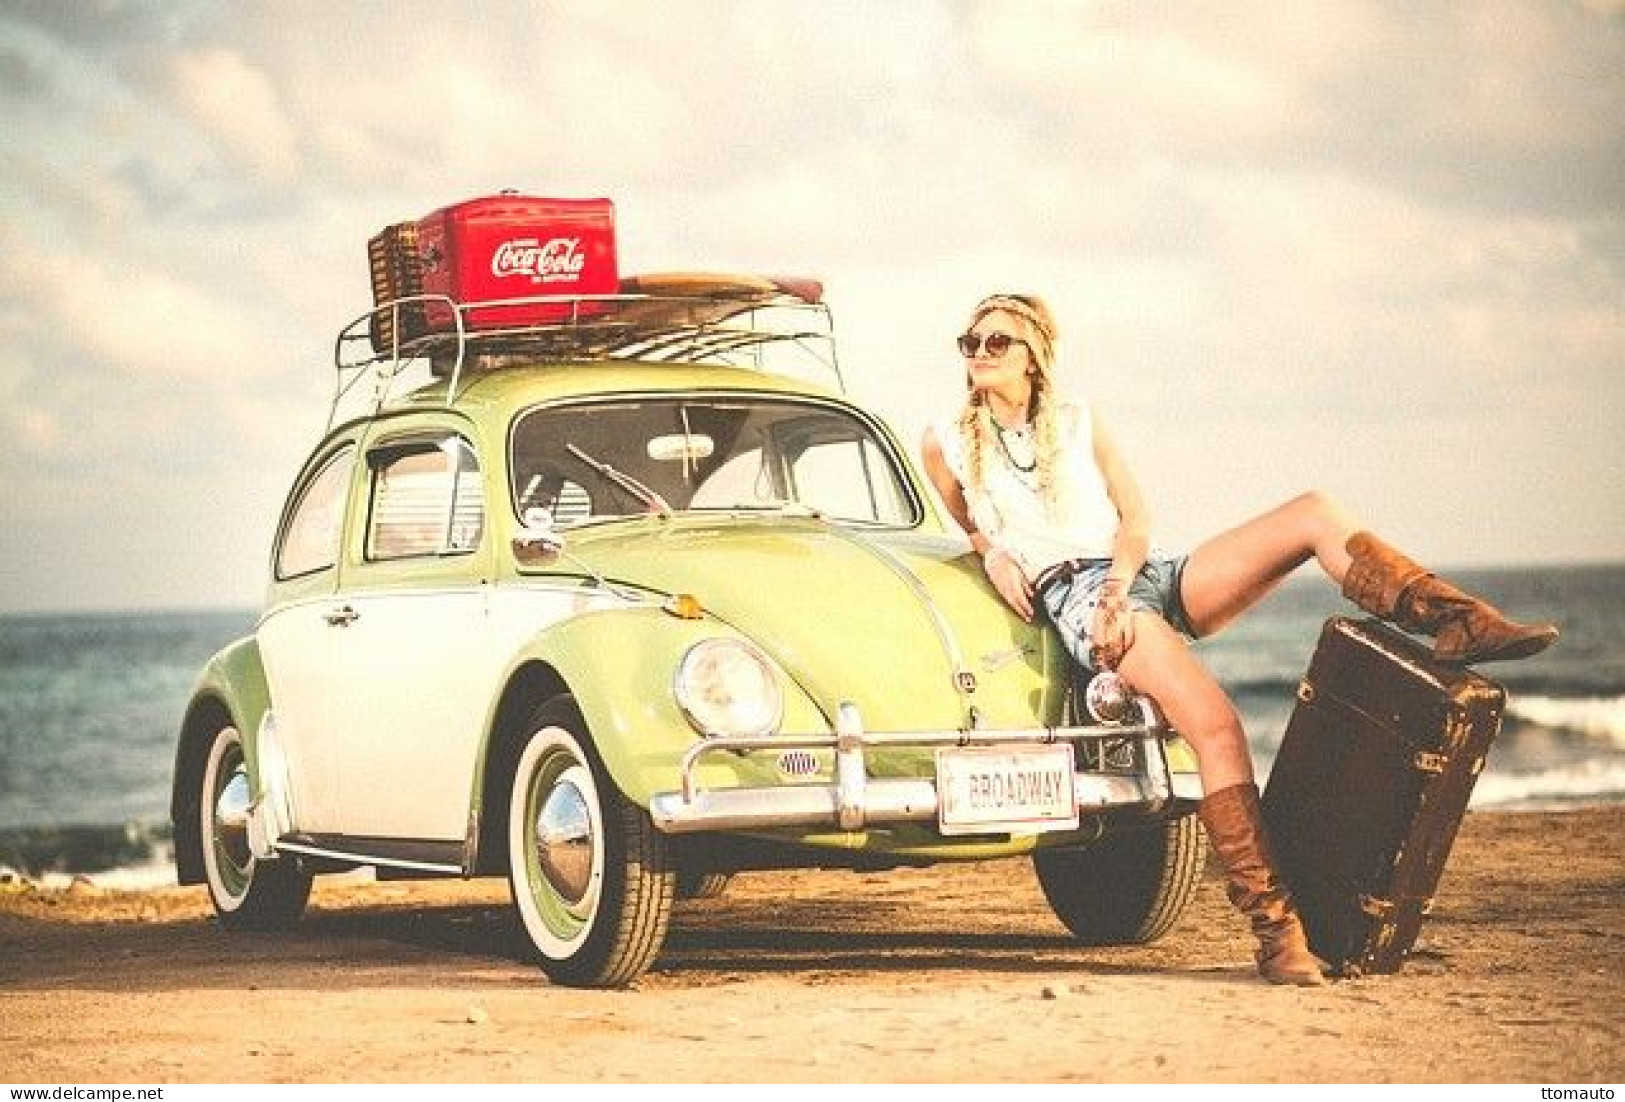 Volkswagen Coccinelle With Coca-Cola Advertising On Beach  - 15x10cms PHOTO - Passenger Cars